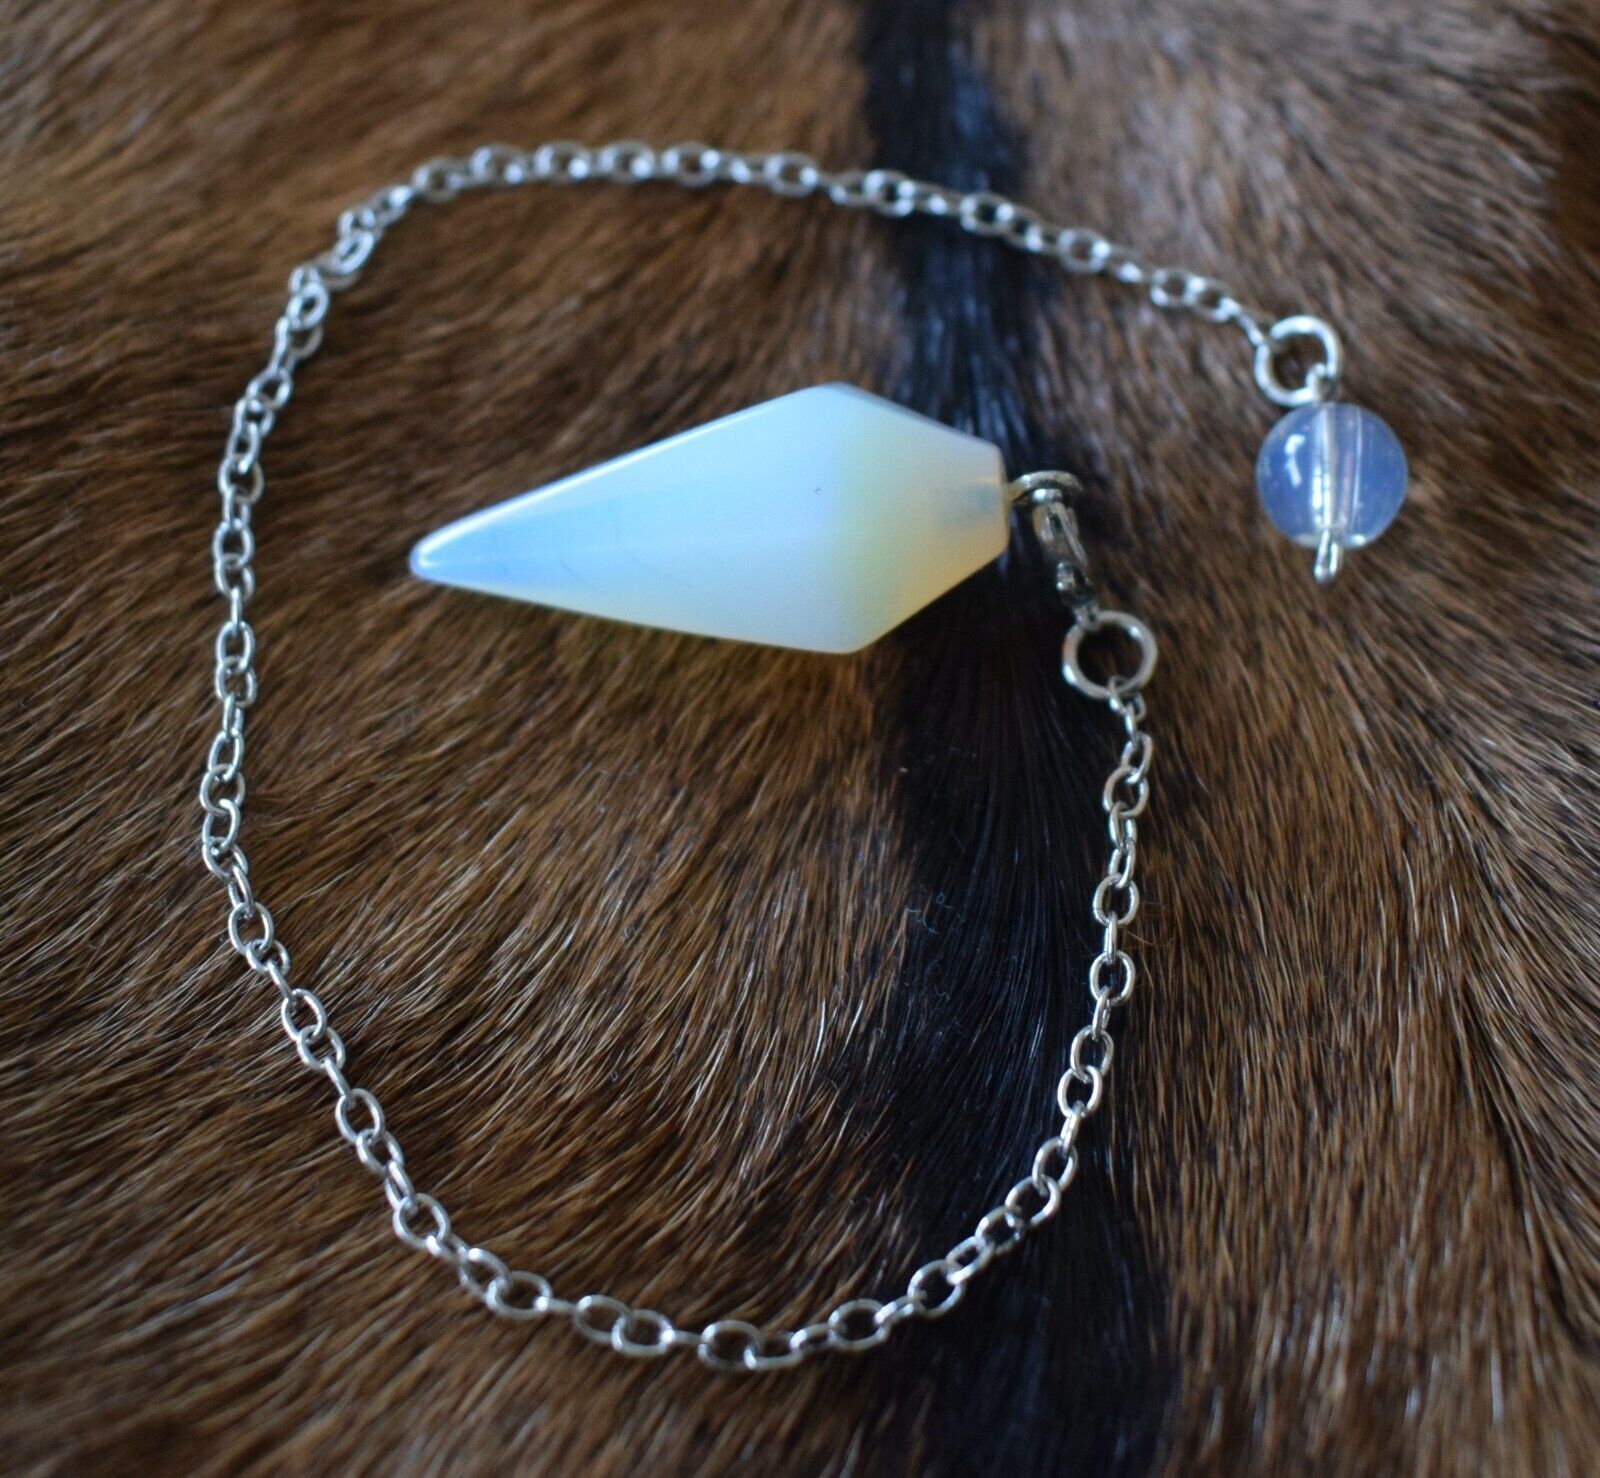 OPALITE PENDULUM Gemstone Point Crystal for Dowsing and Divination